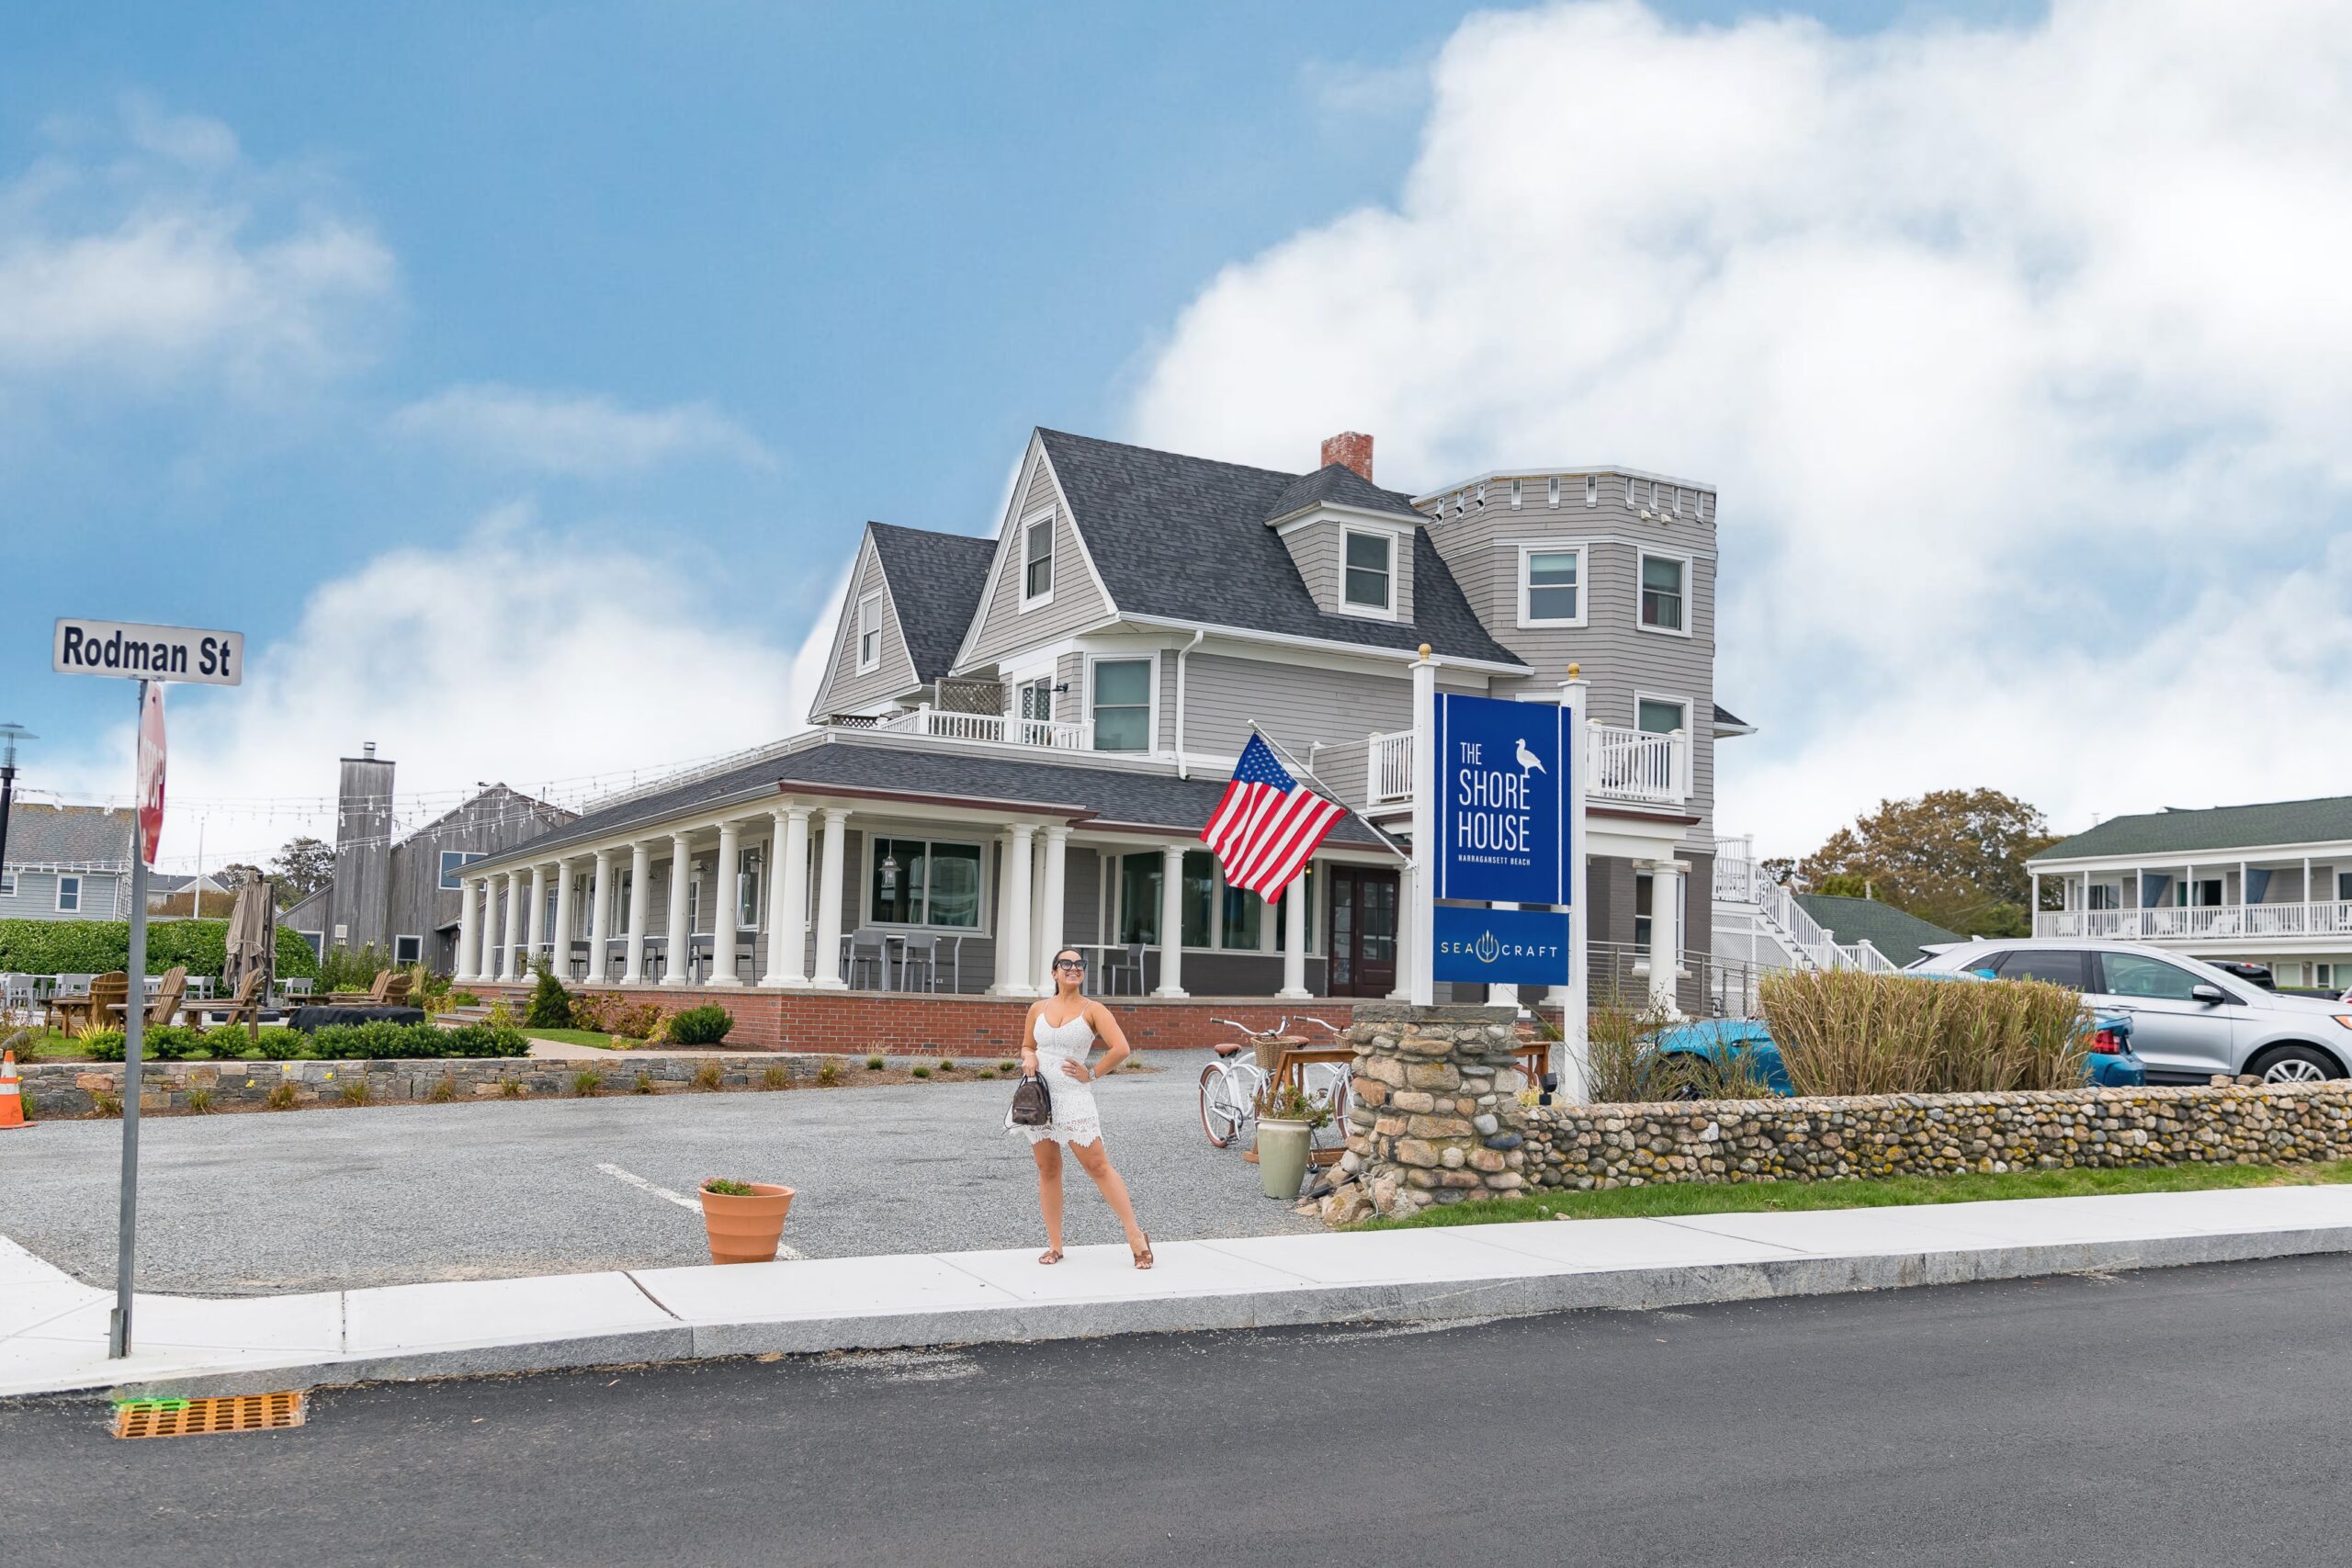 why you need to visit shore house Narragansett ri